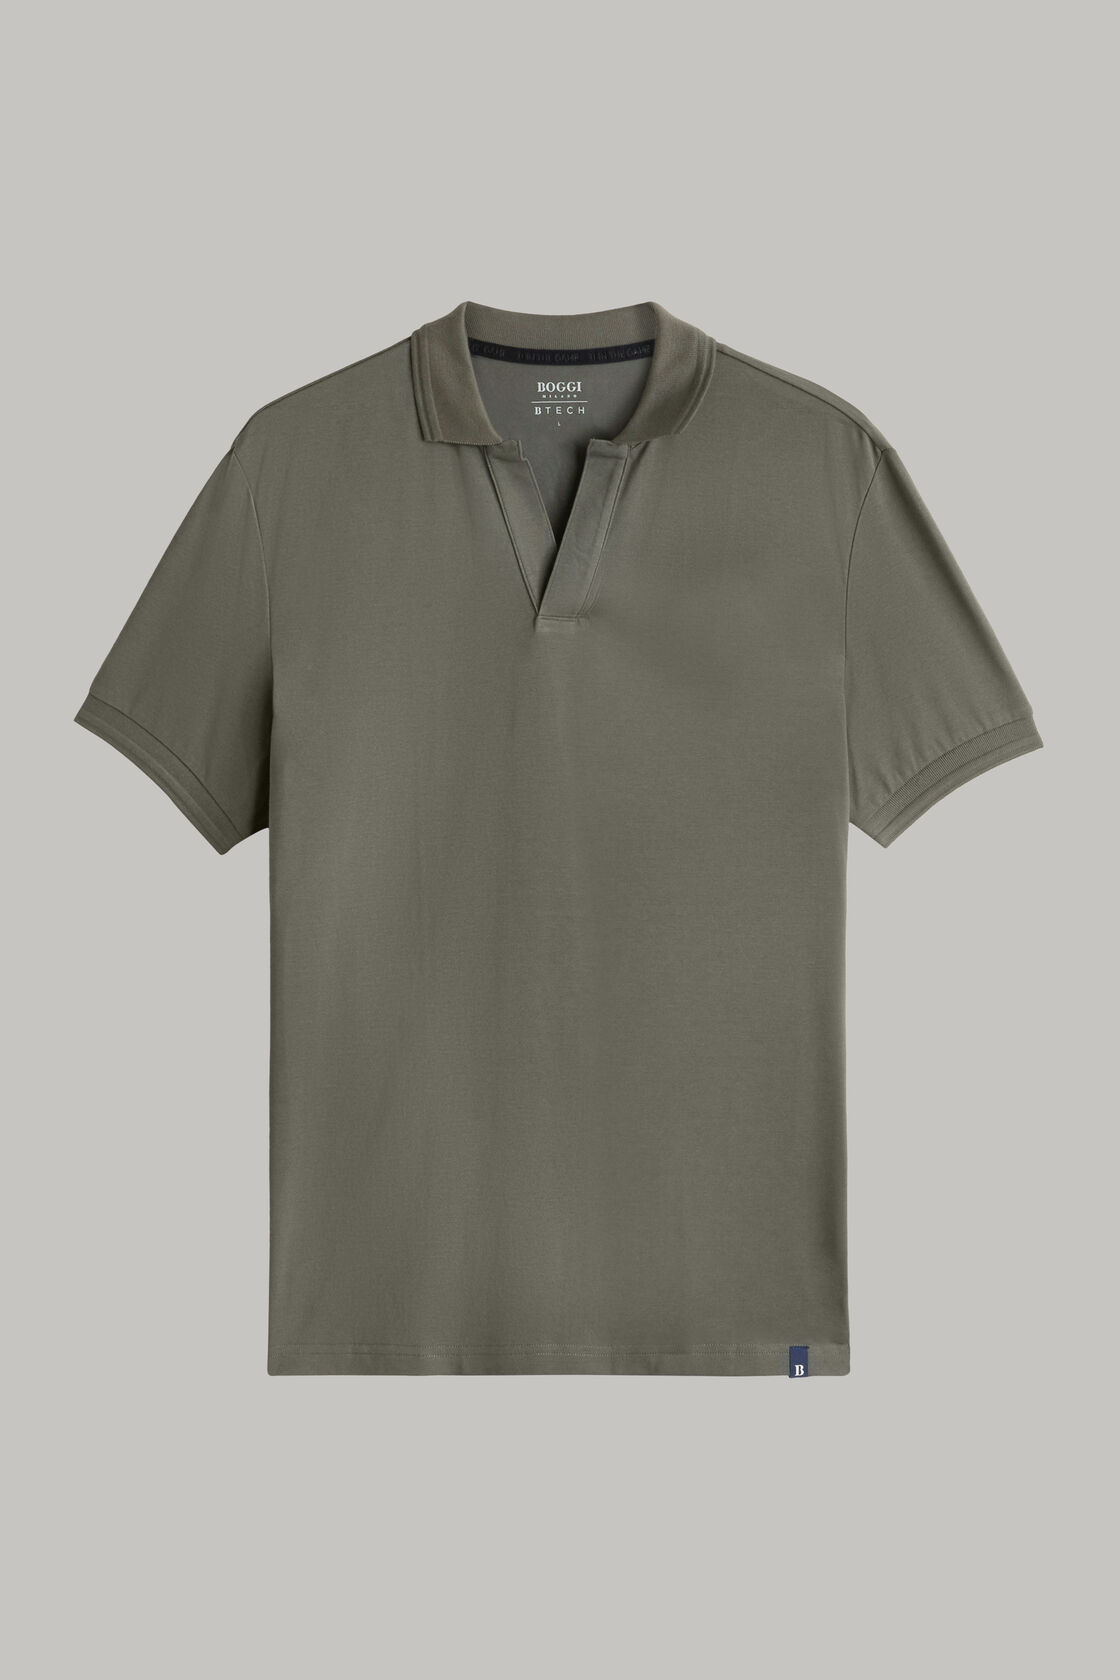 Polo shirt in sustainable performance pique | Boggi